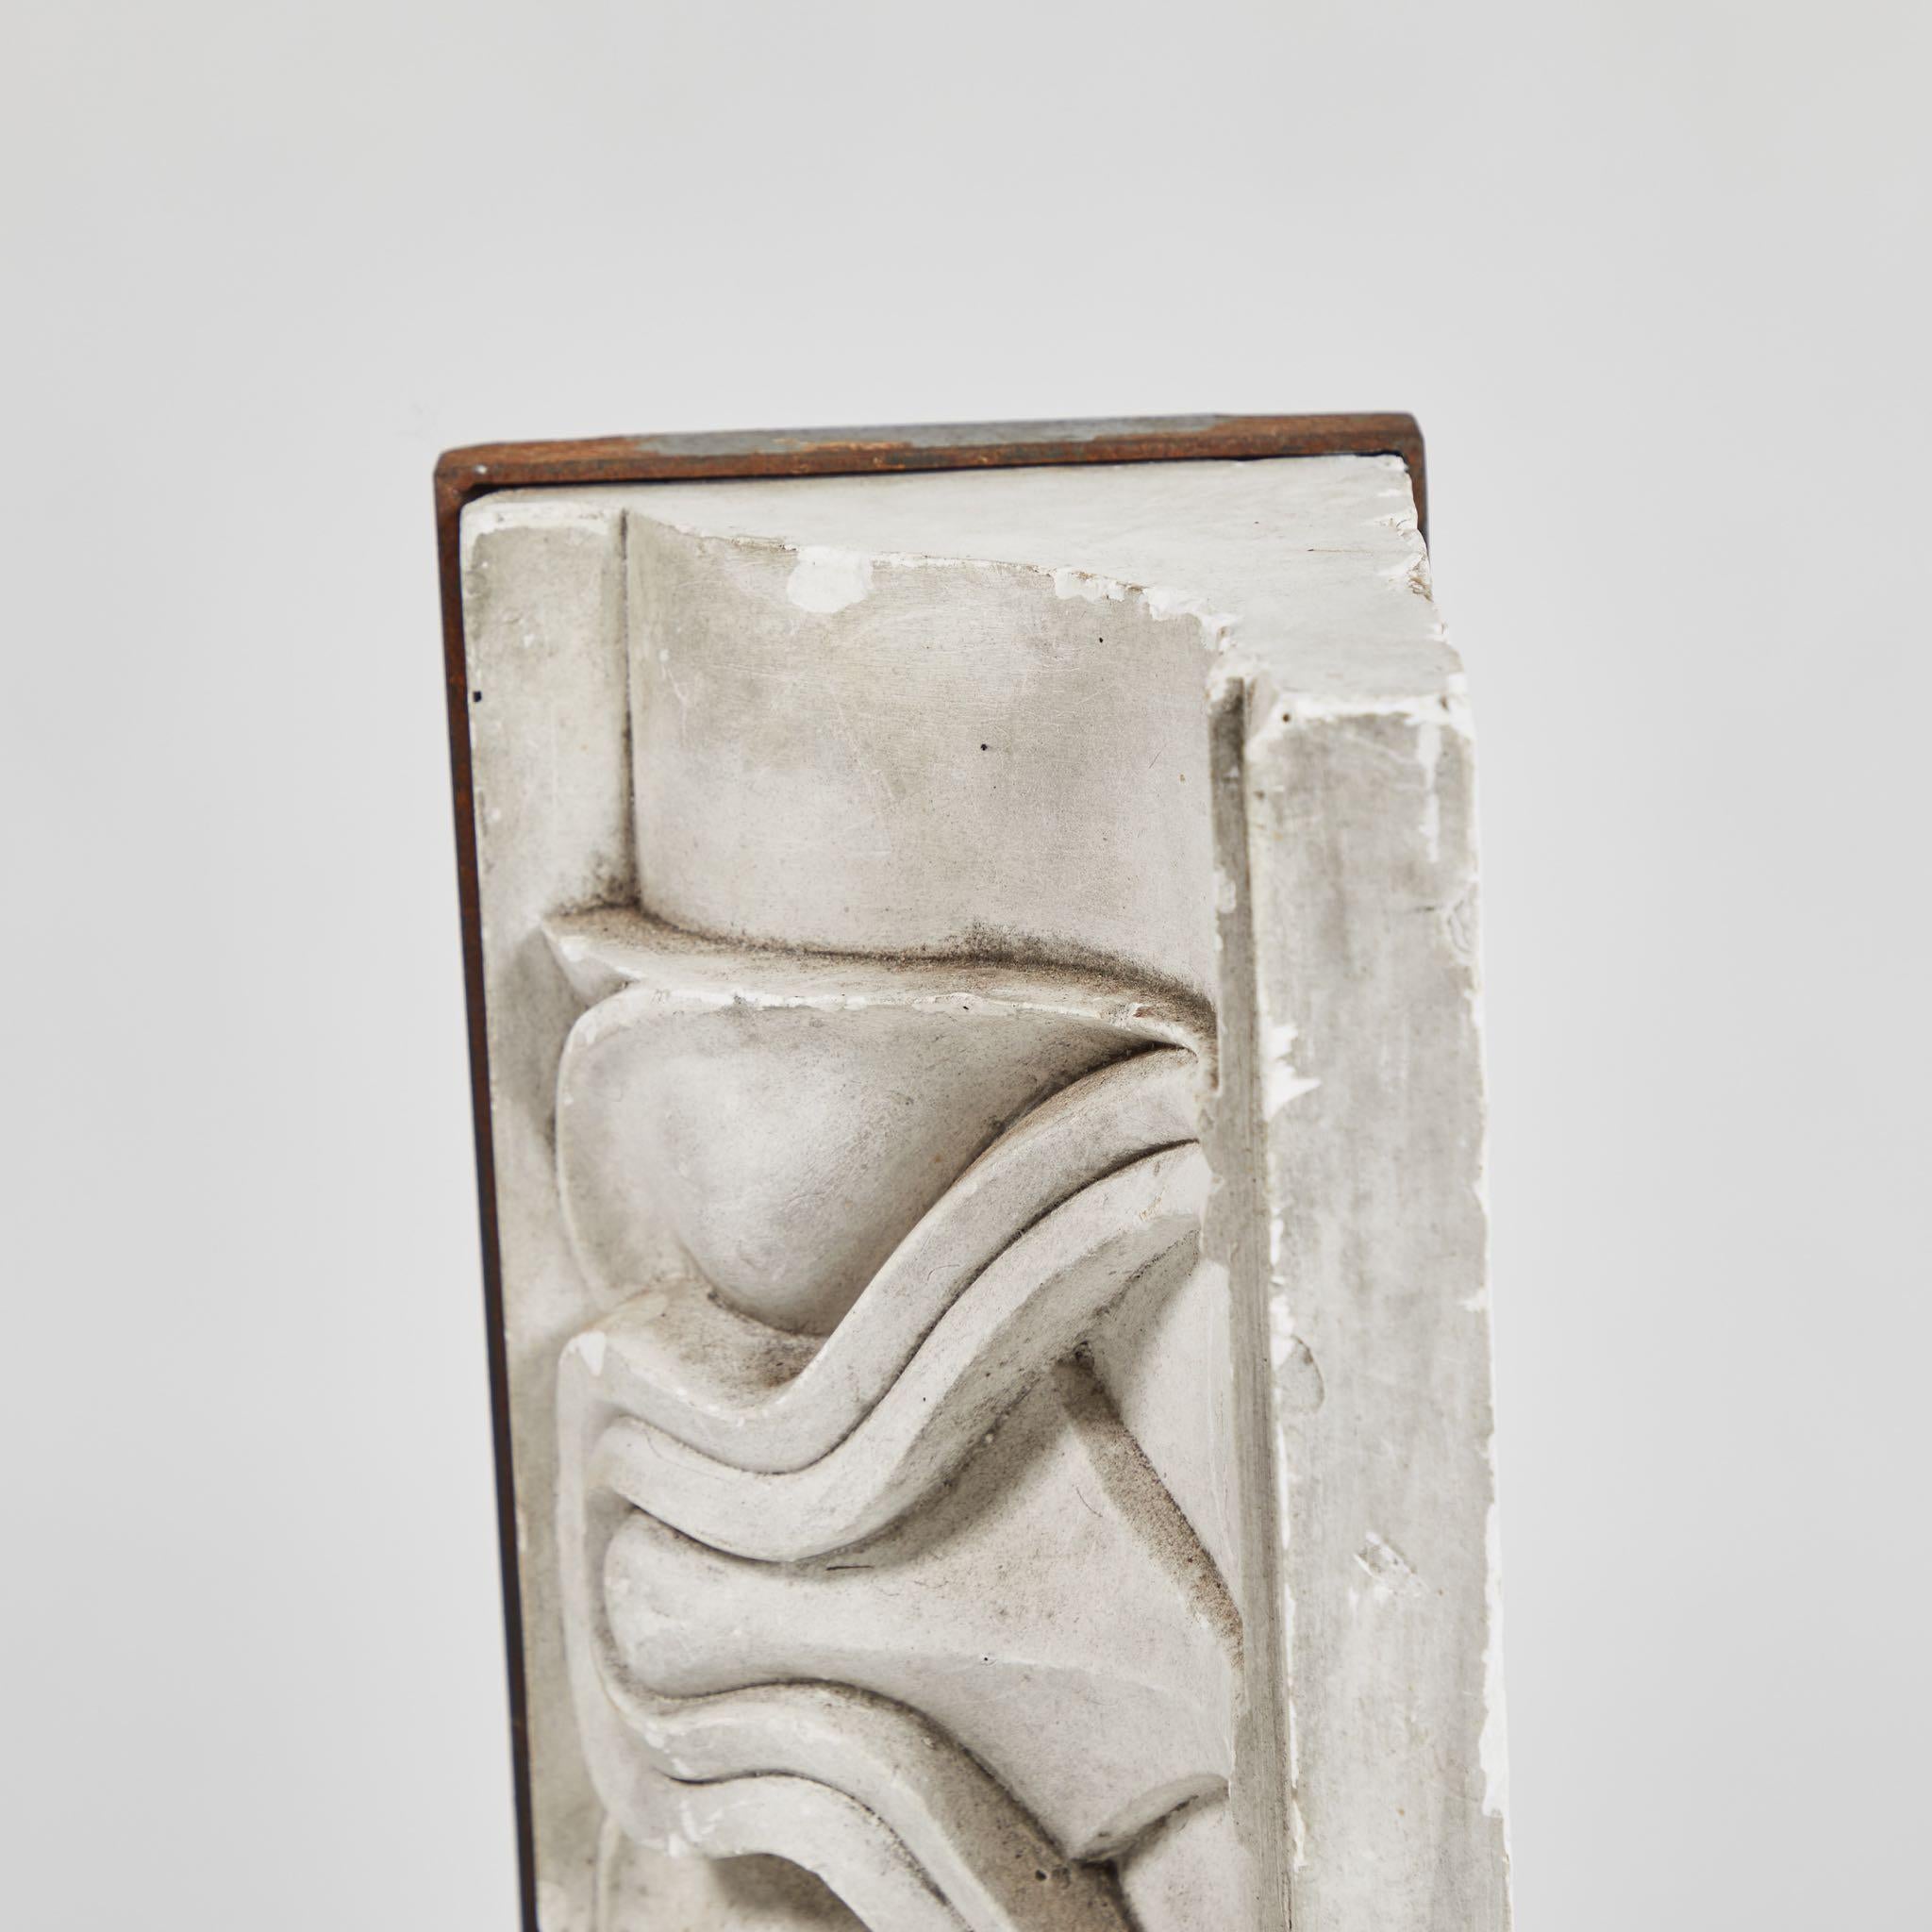 Carved plaster architectural relief mounted on an industrial iron display stand. This sort of item would have been used by an architect to model the range of flourishes available to clients. As a sculptural decorative accent, the piece adds a touch